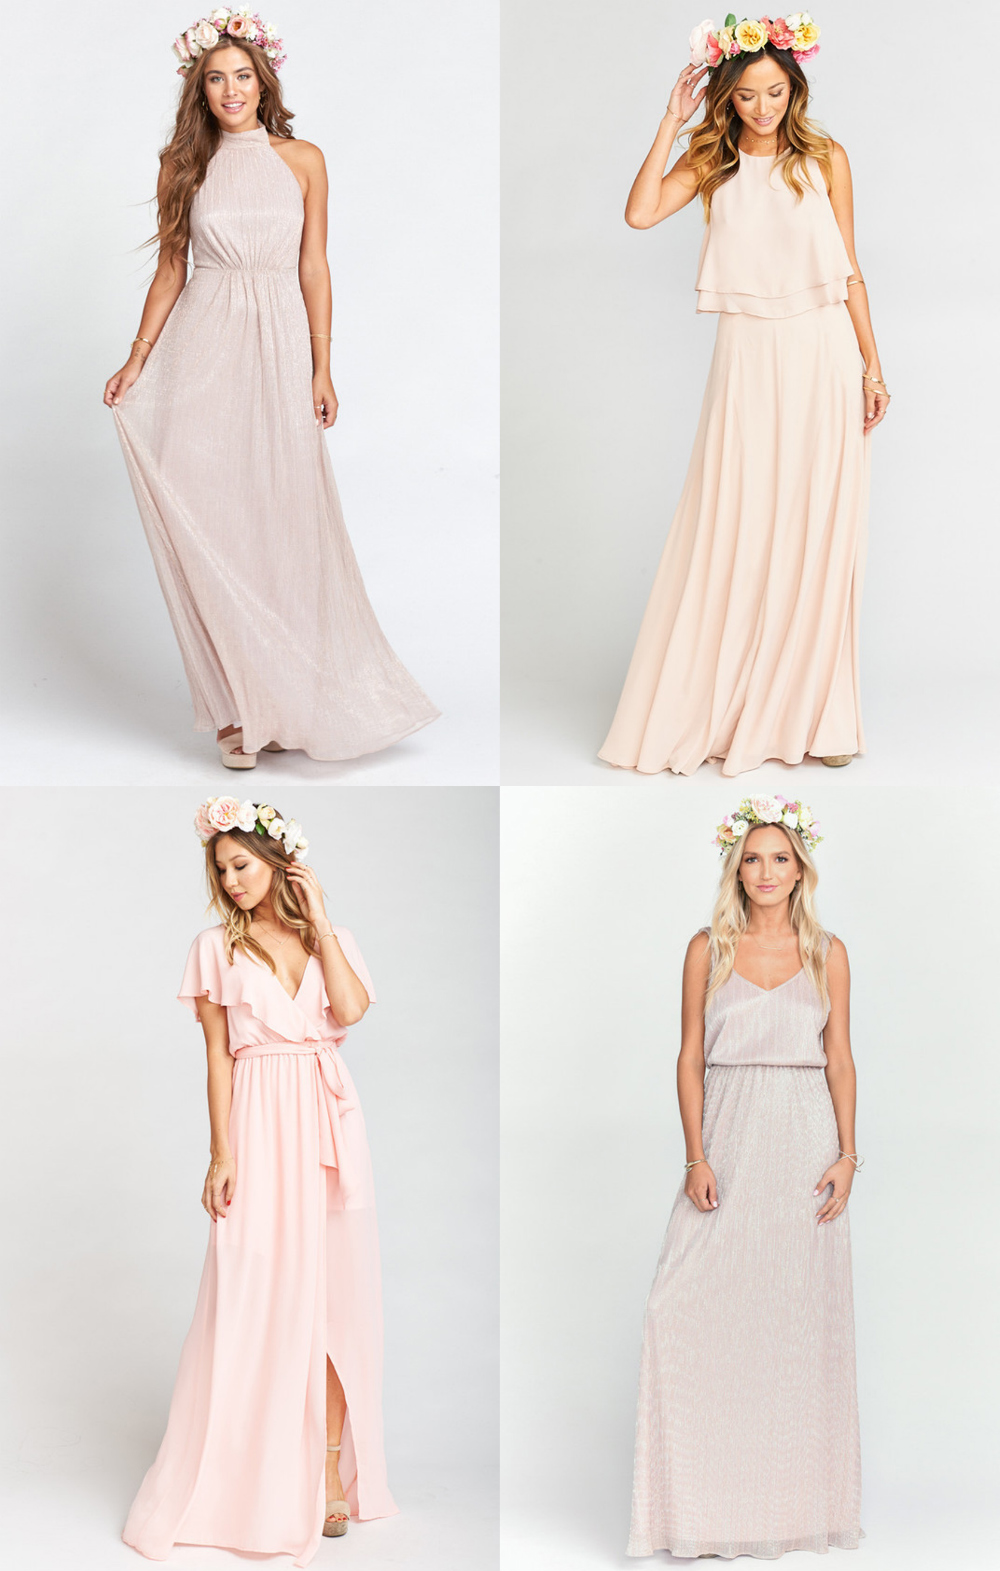 Blush and Gold Mix and Match Bridesmaid Dresses - Dress for the Wedding